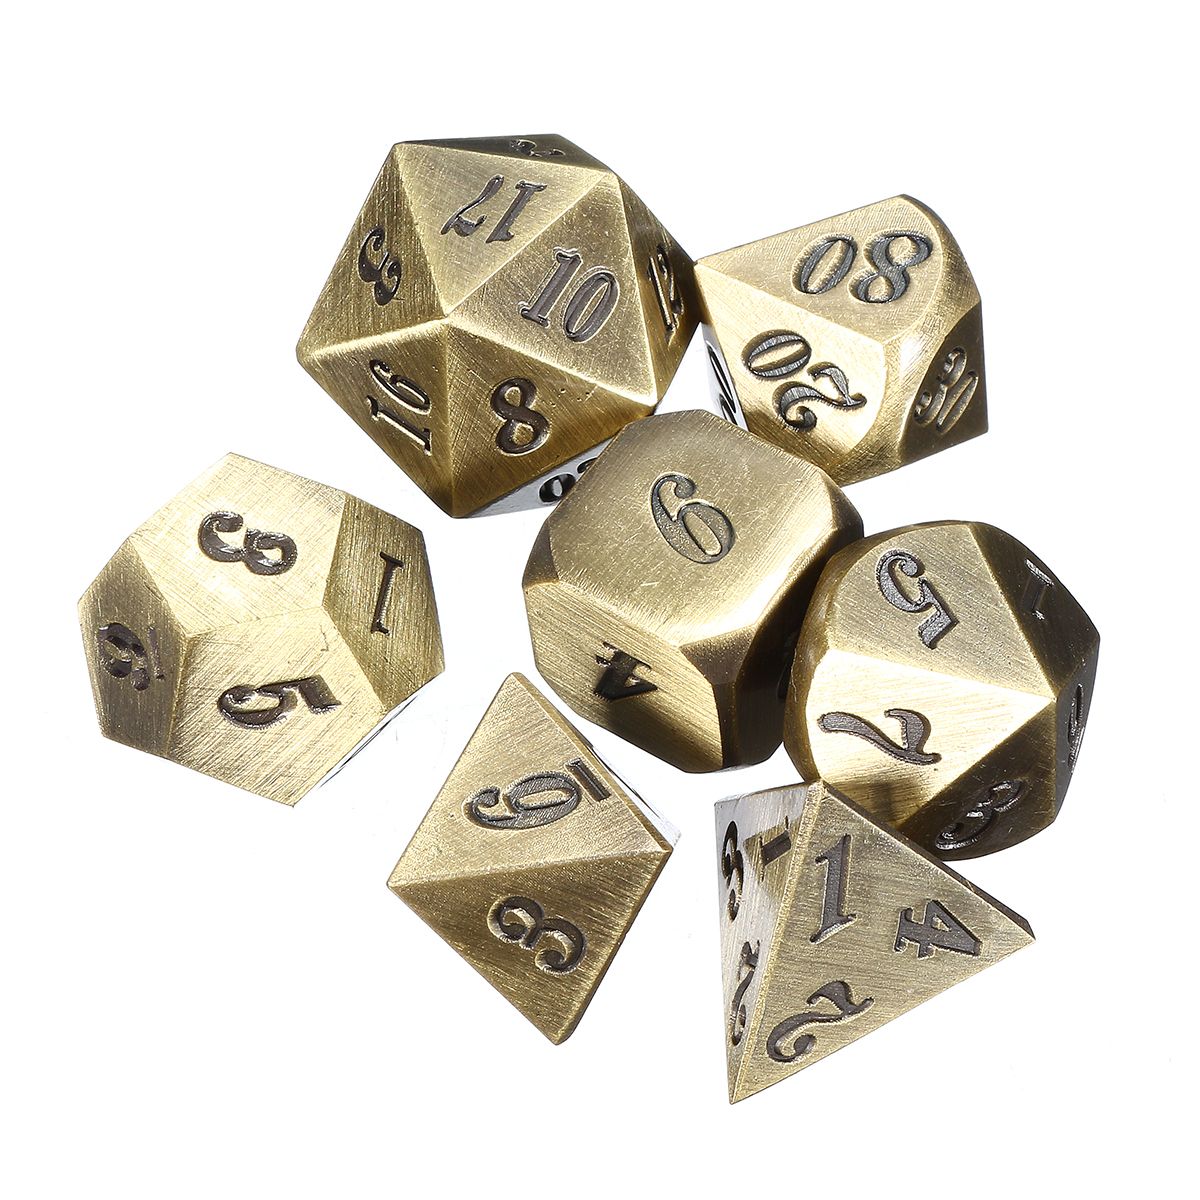 Antique-Color-Heavy-Dice-Set-Polyhedral-Dices-Role-Playing-Games-Dice-Gadget-RPG-1391315